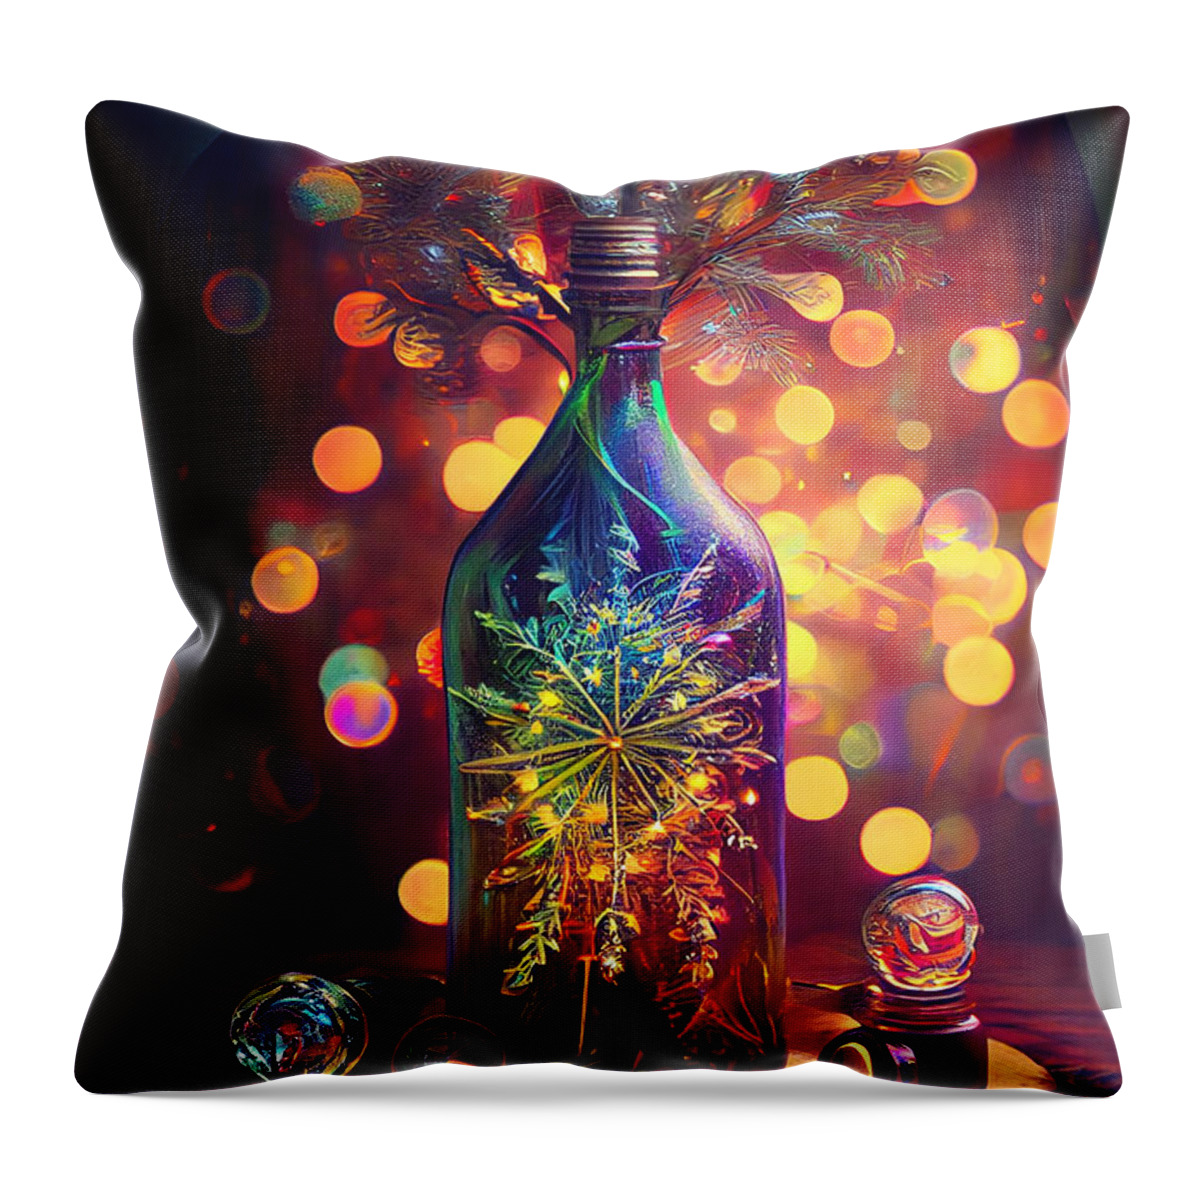 Series Throw Pillow featuring the digital art Fireworks In Bottle #3 by Sabantha